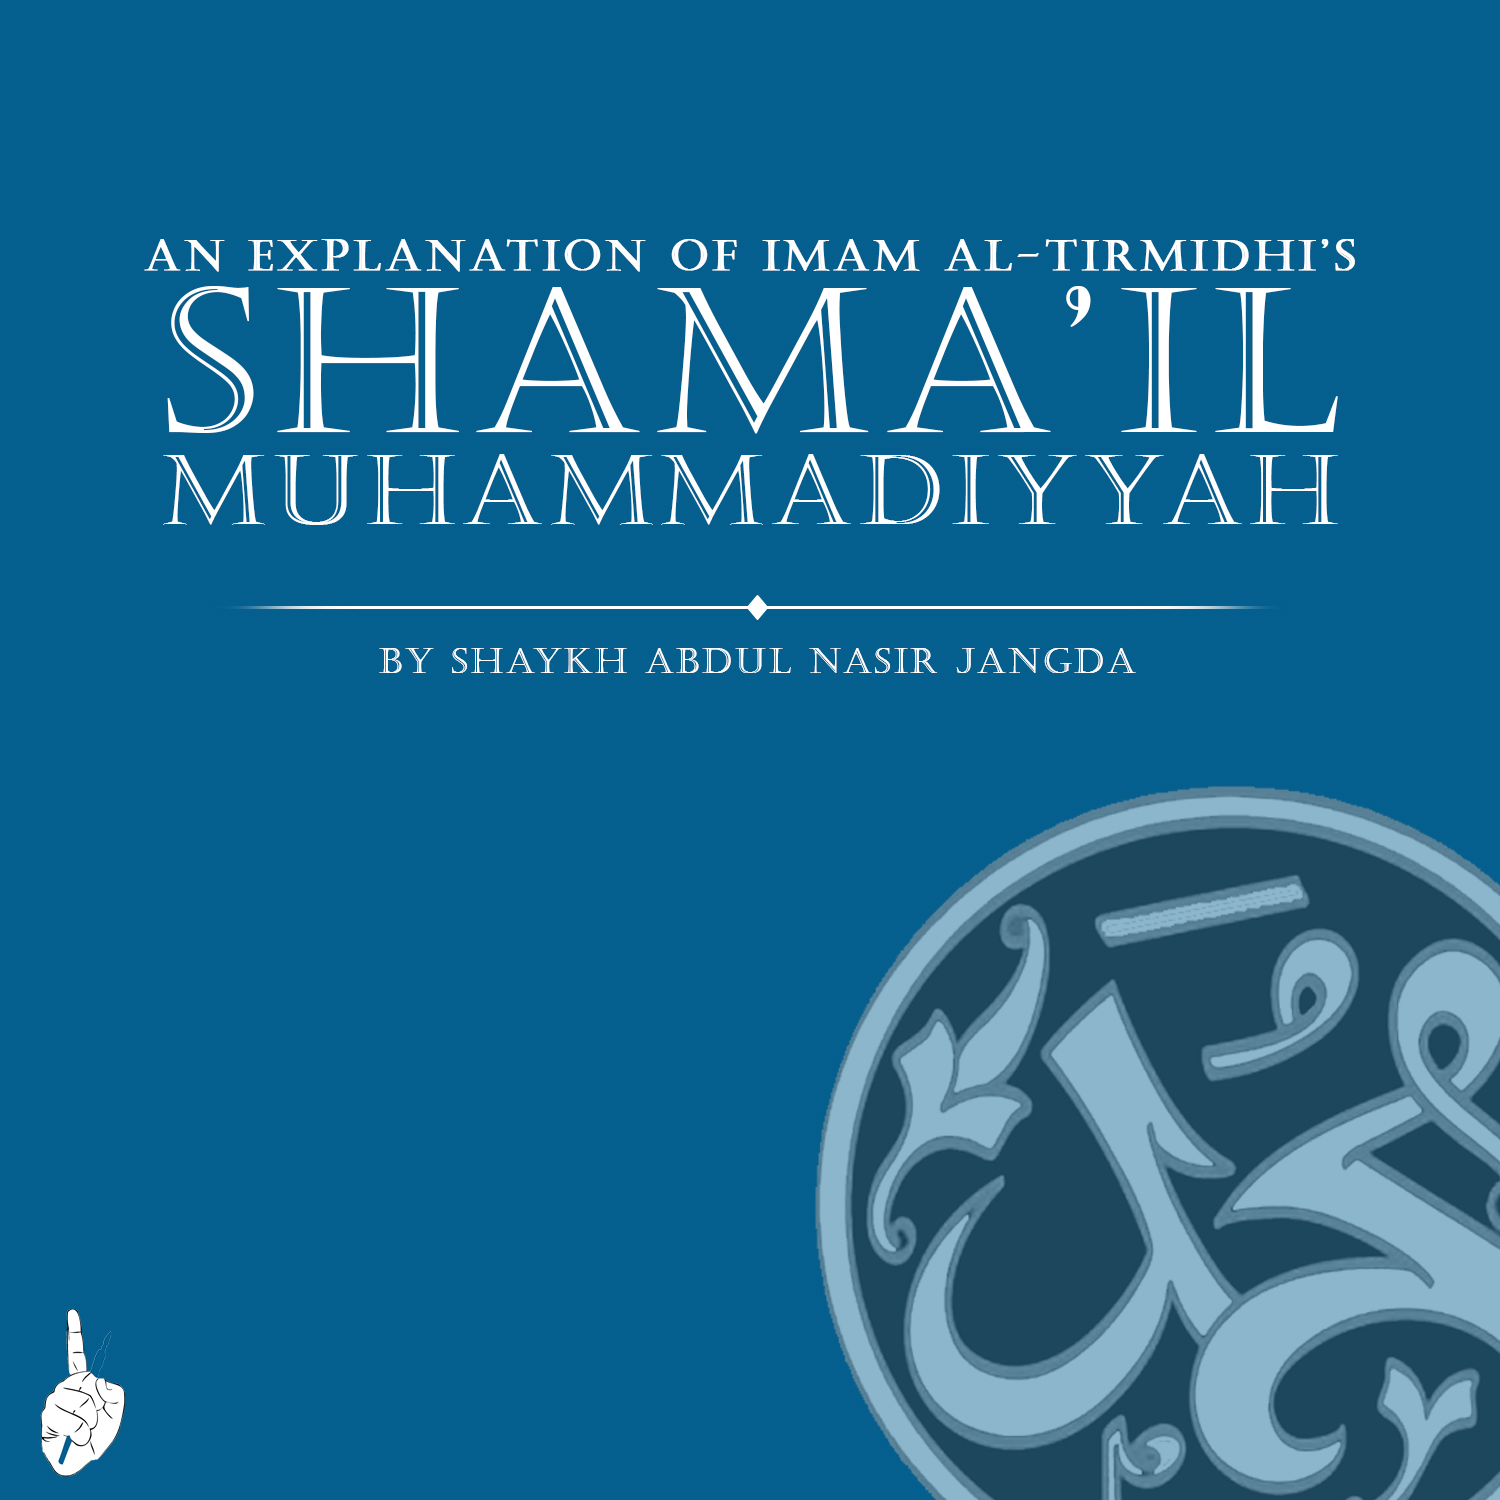 Shama’il Muhammadiyyah: EP4 – The Physical Features of the Prophet Part 4